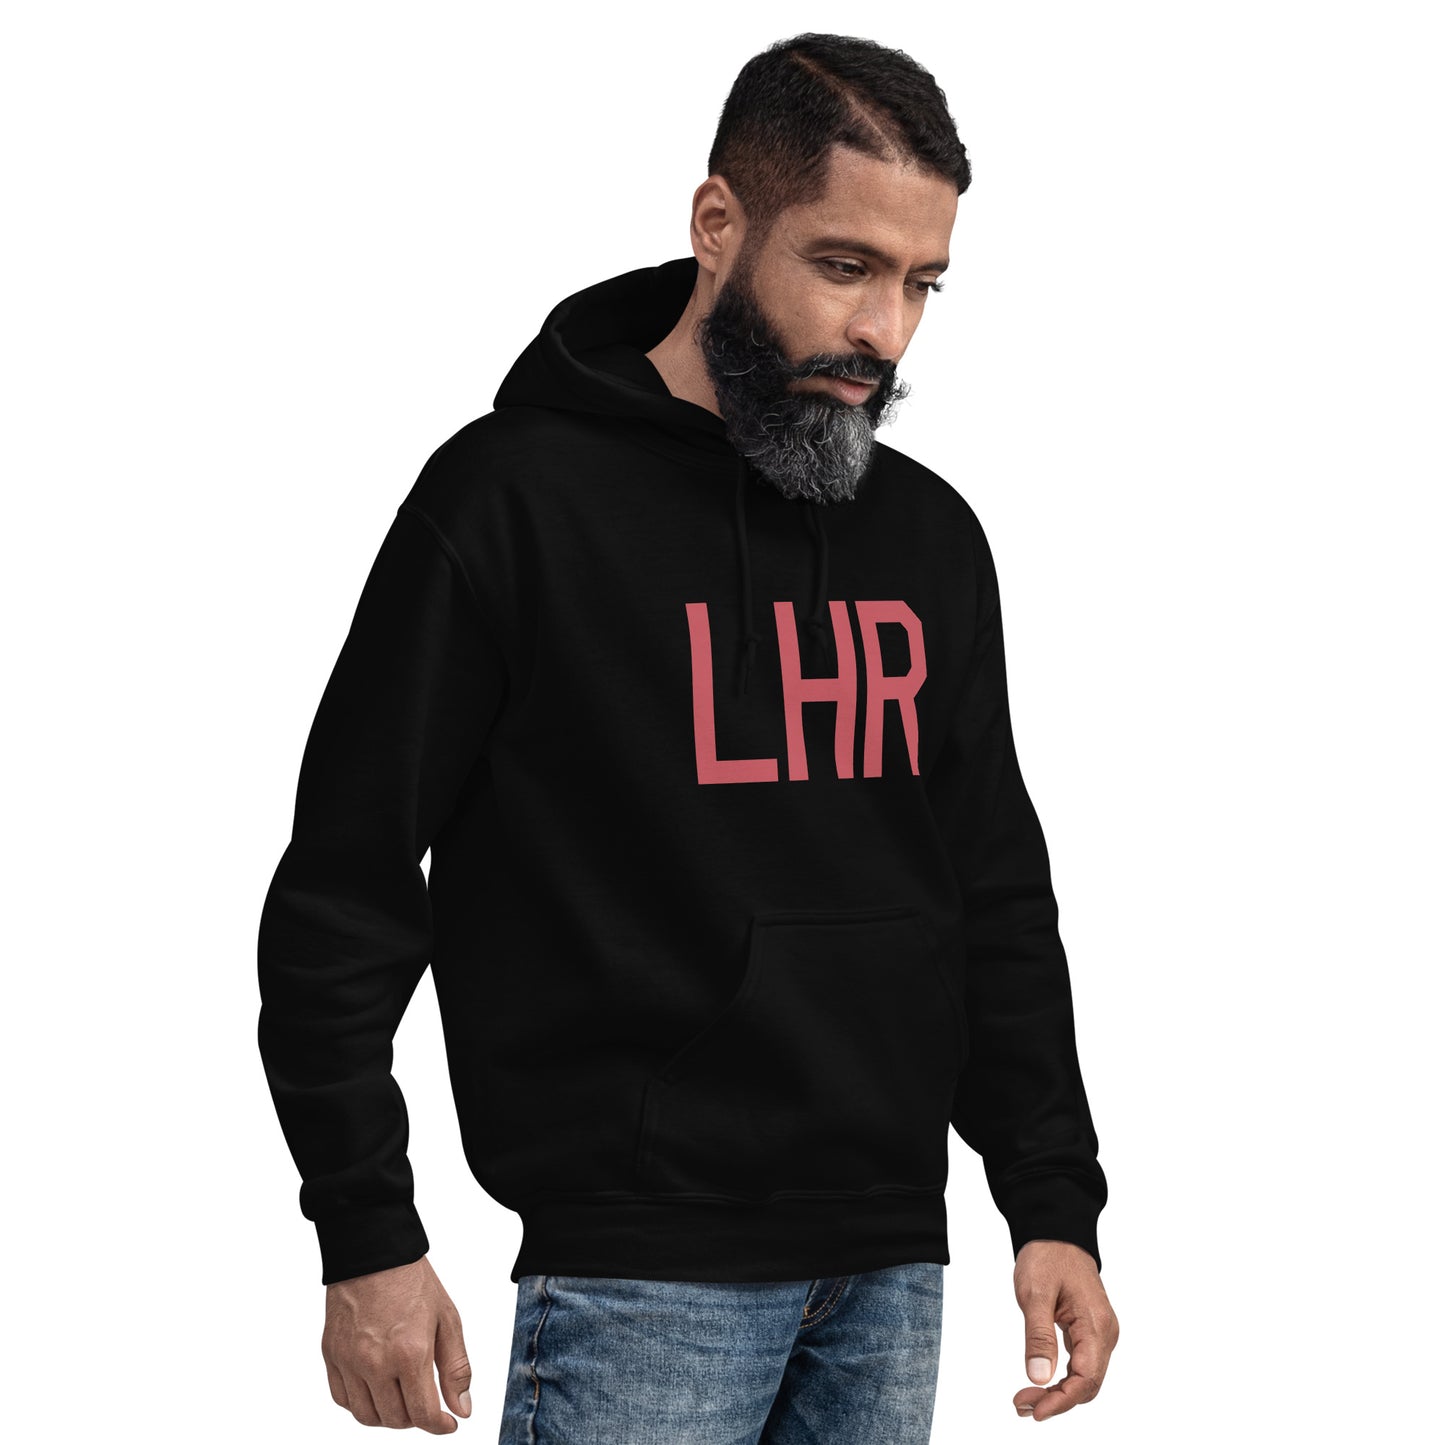 Aviation Enthusiast Hoodie - Deep Pink Graphic • LHR London • YHM Designs - Image 06